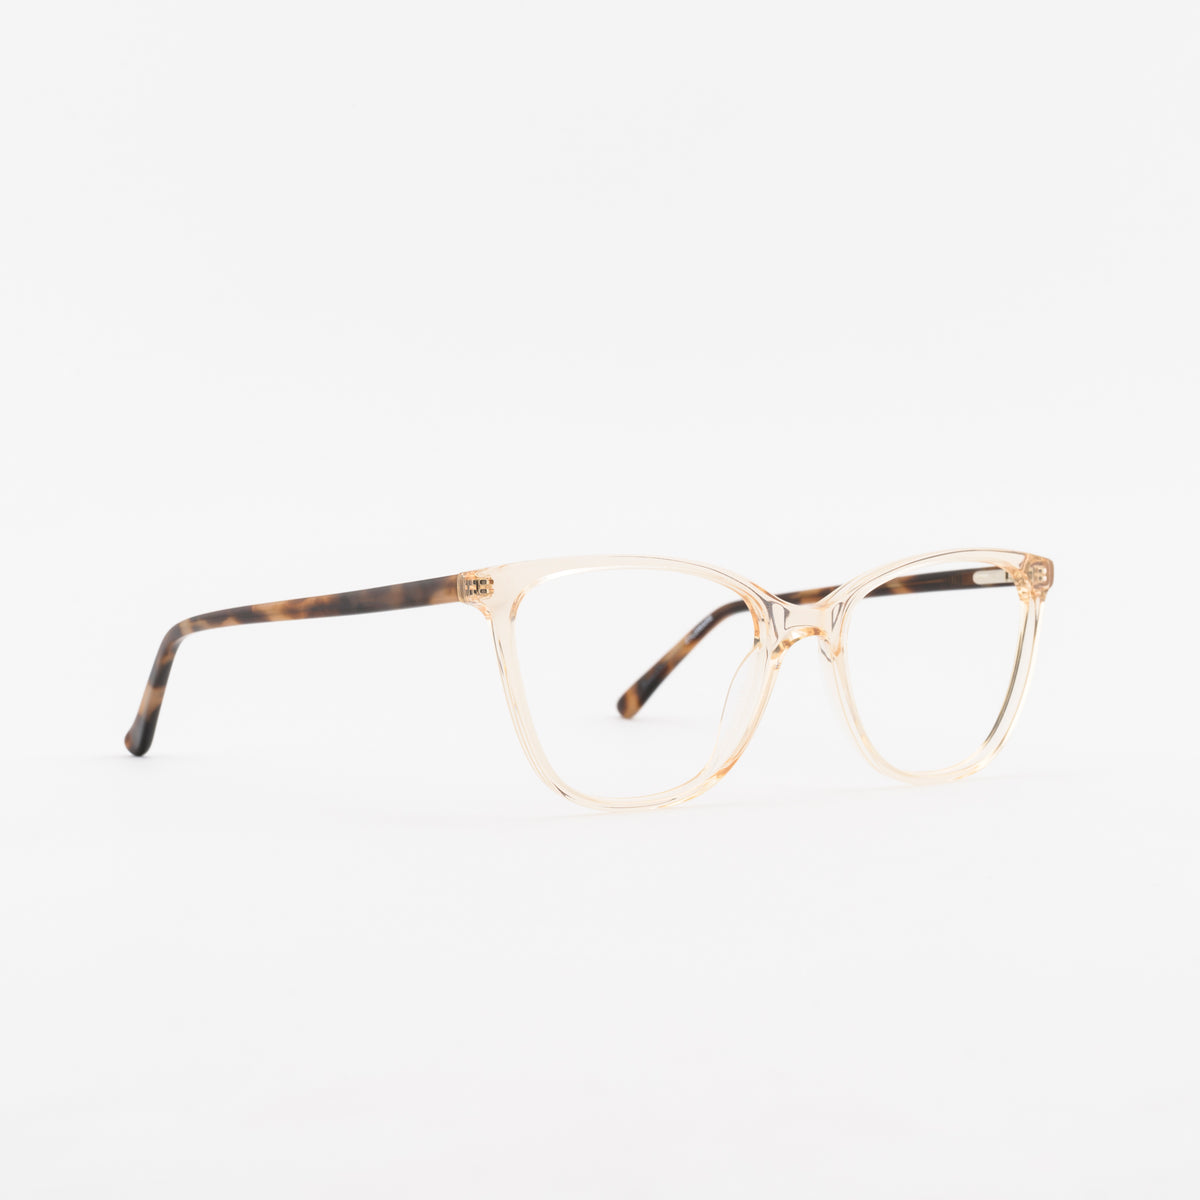 111Z Frames PF 53 007 - CHAMPAGNE Not Available